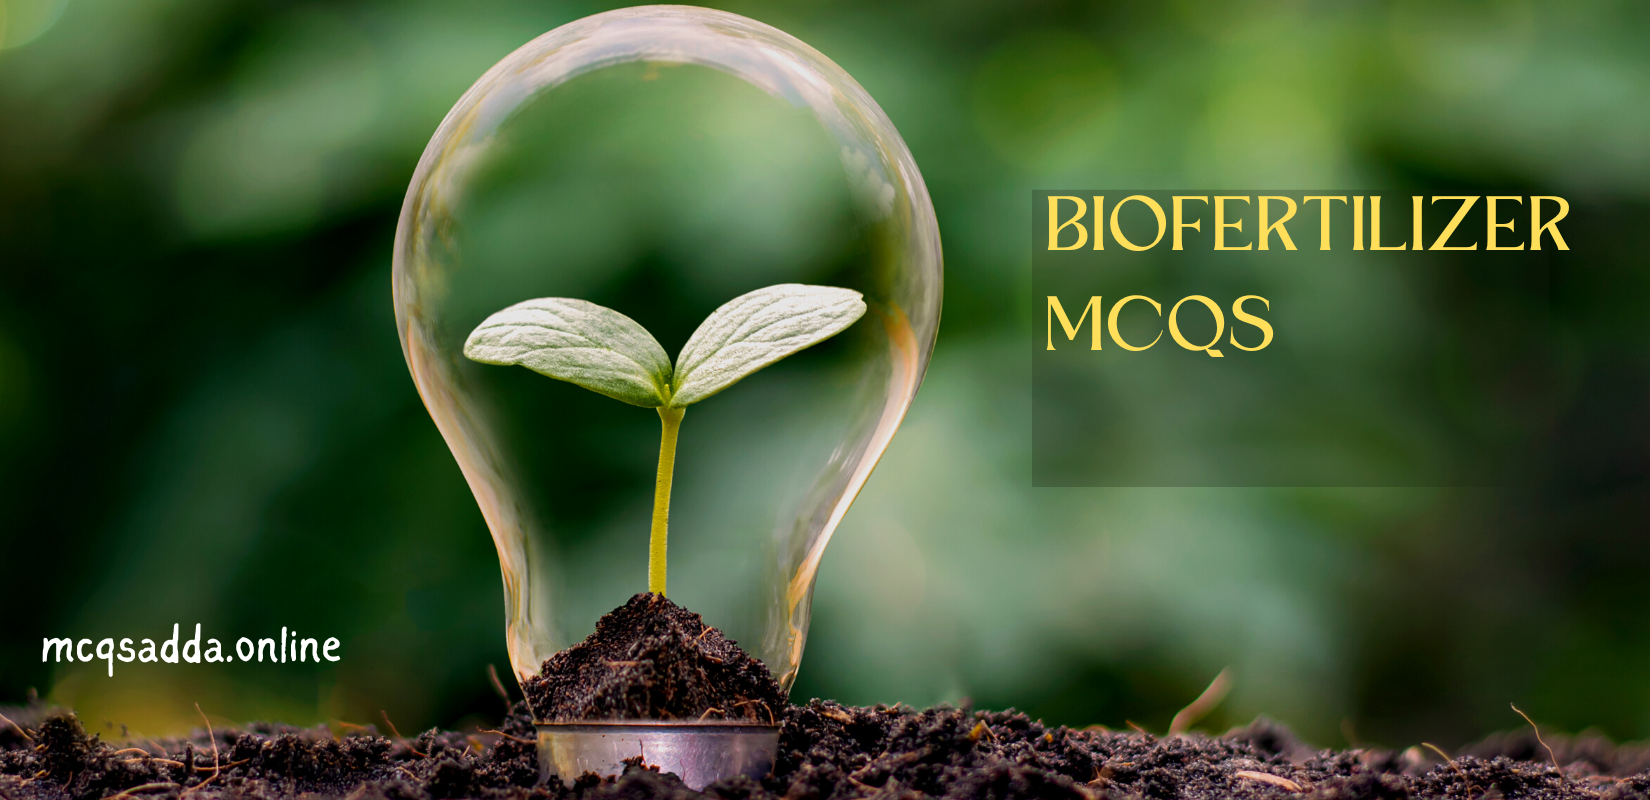 Biofertilizer questions and answers